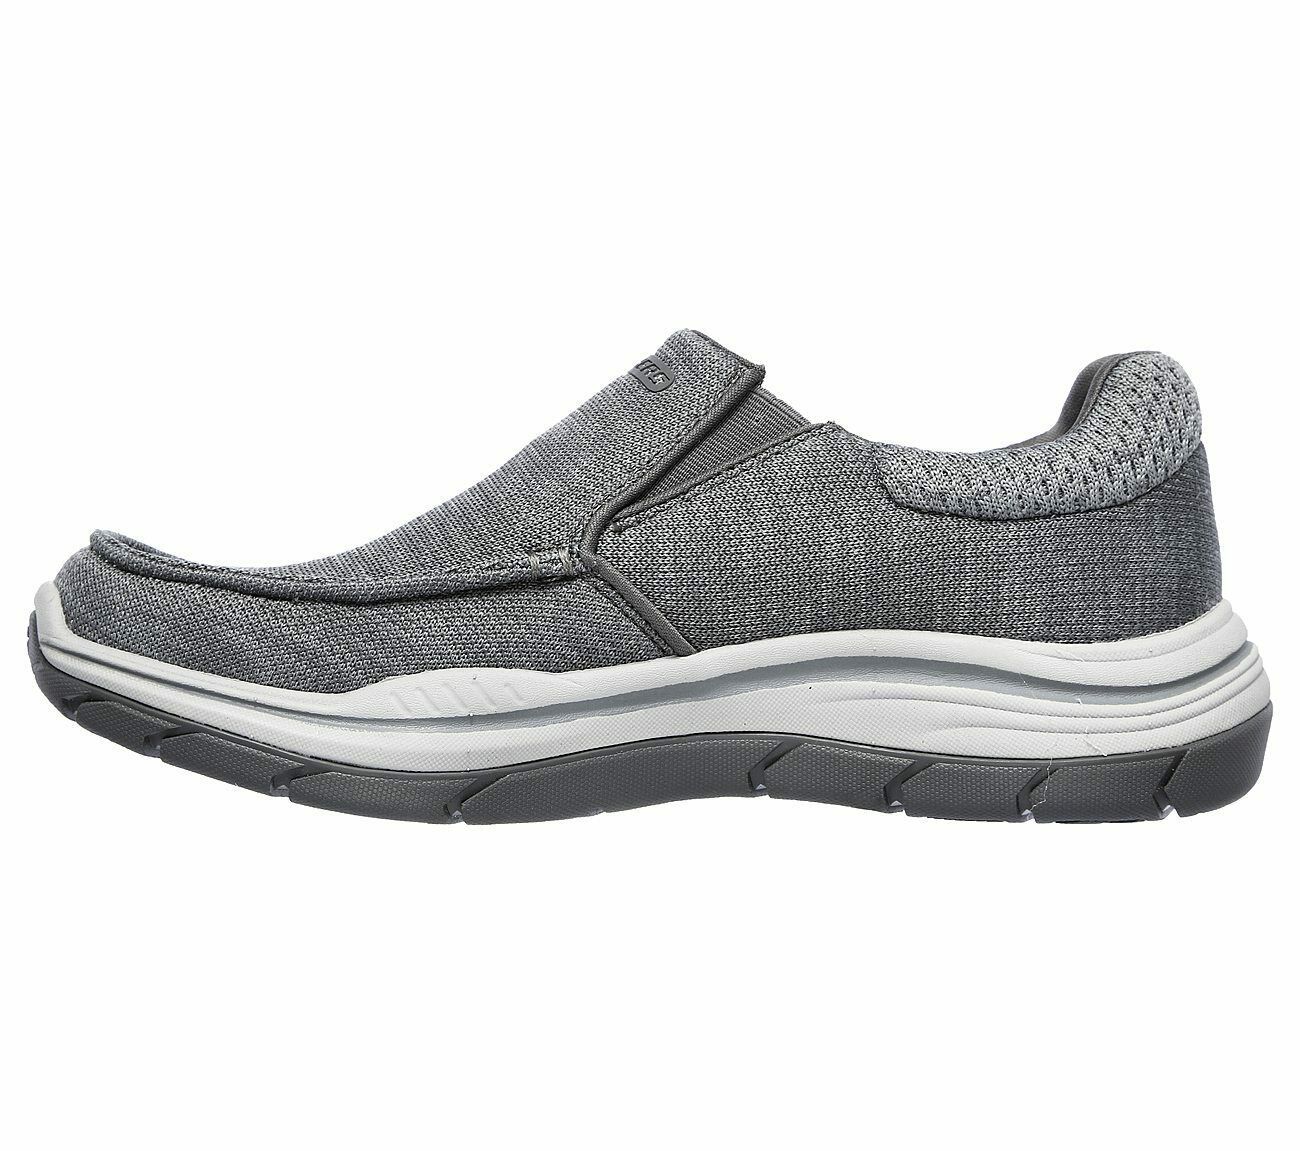 Skechers Extra Wide Fit Gray Shoes Men Comfort Slip On Casual Memory ...